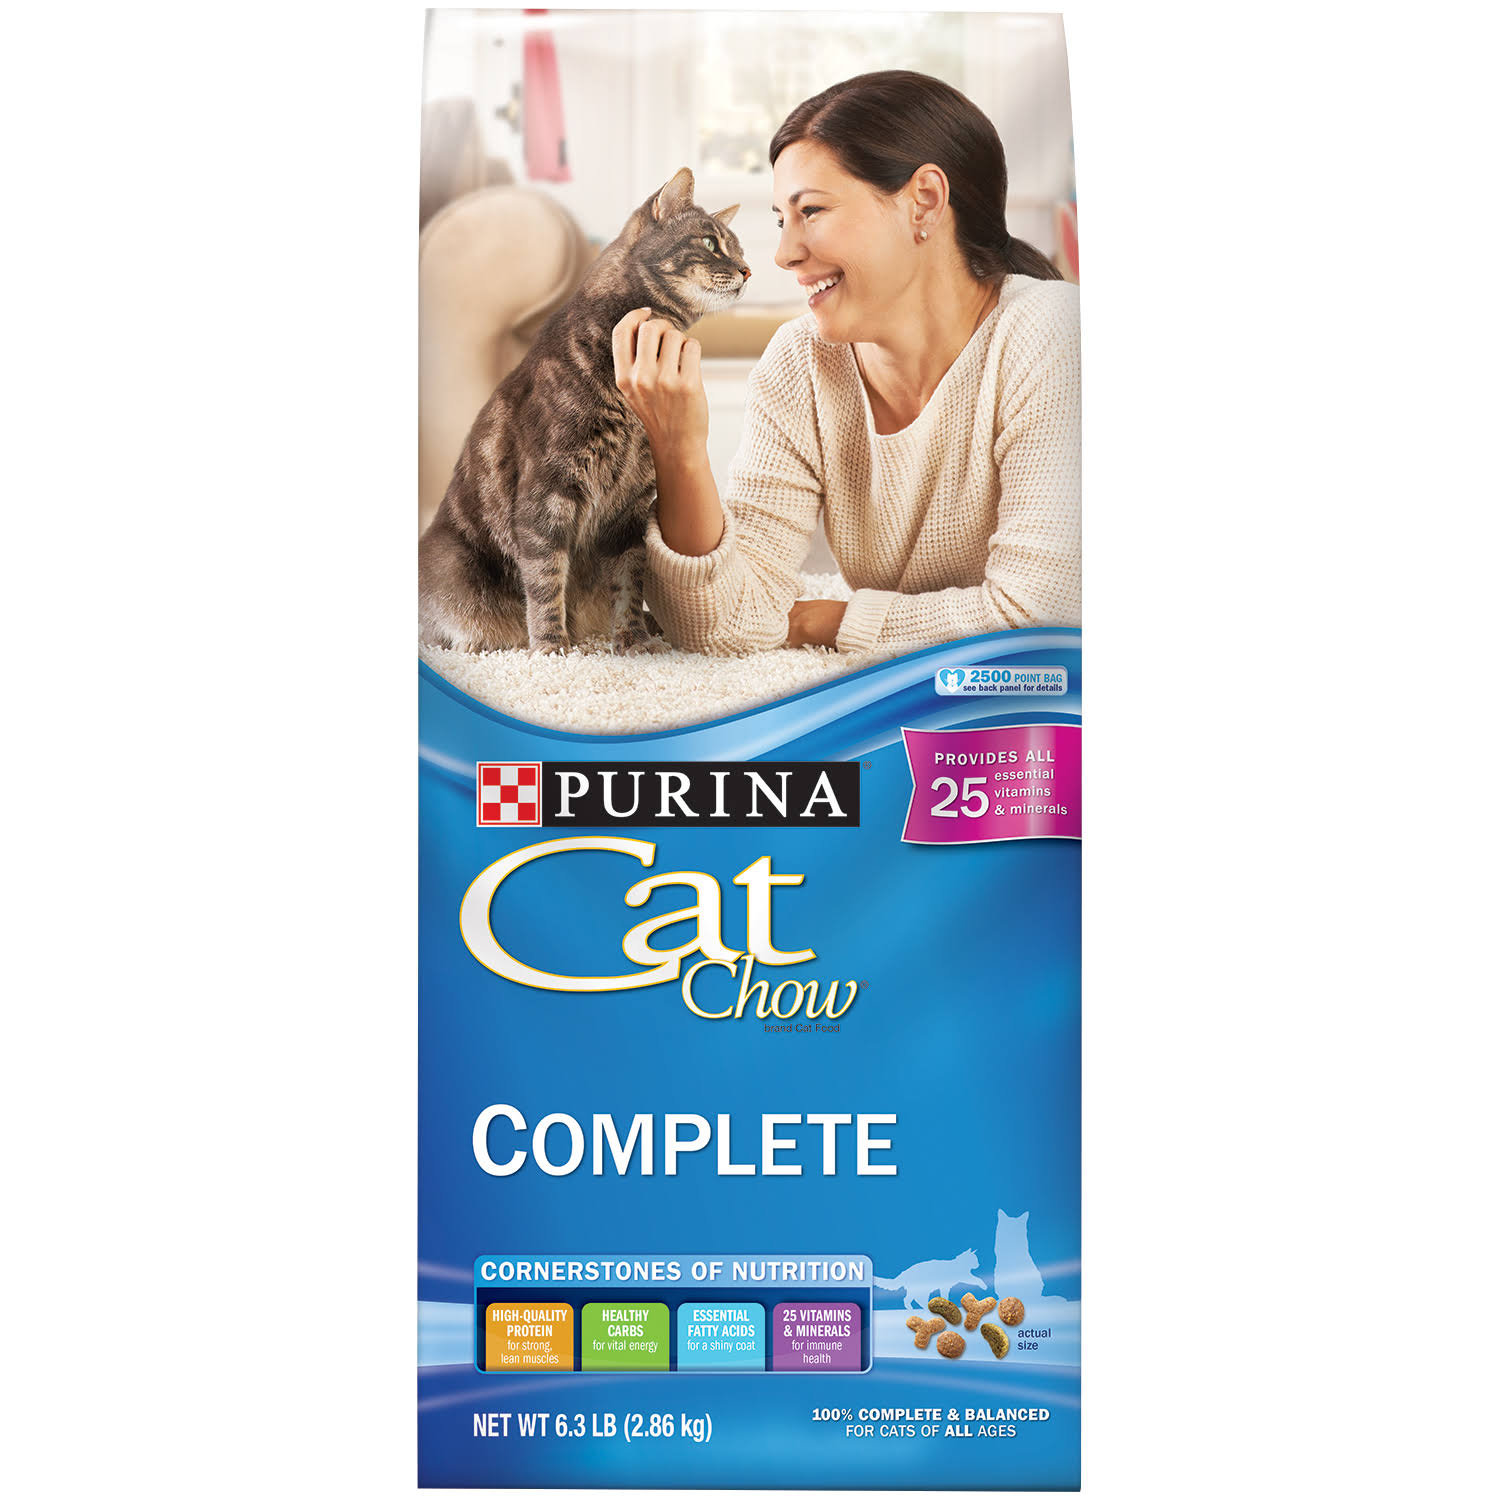 Purina Cat Chow Complete Cat Food - All Ages, 6.3lb